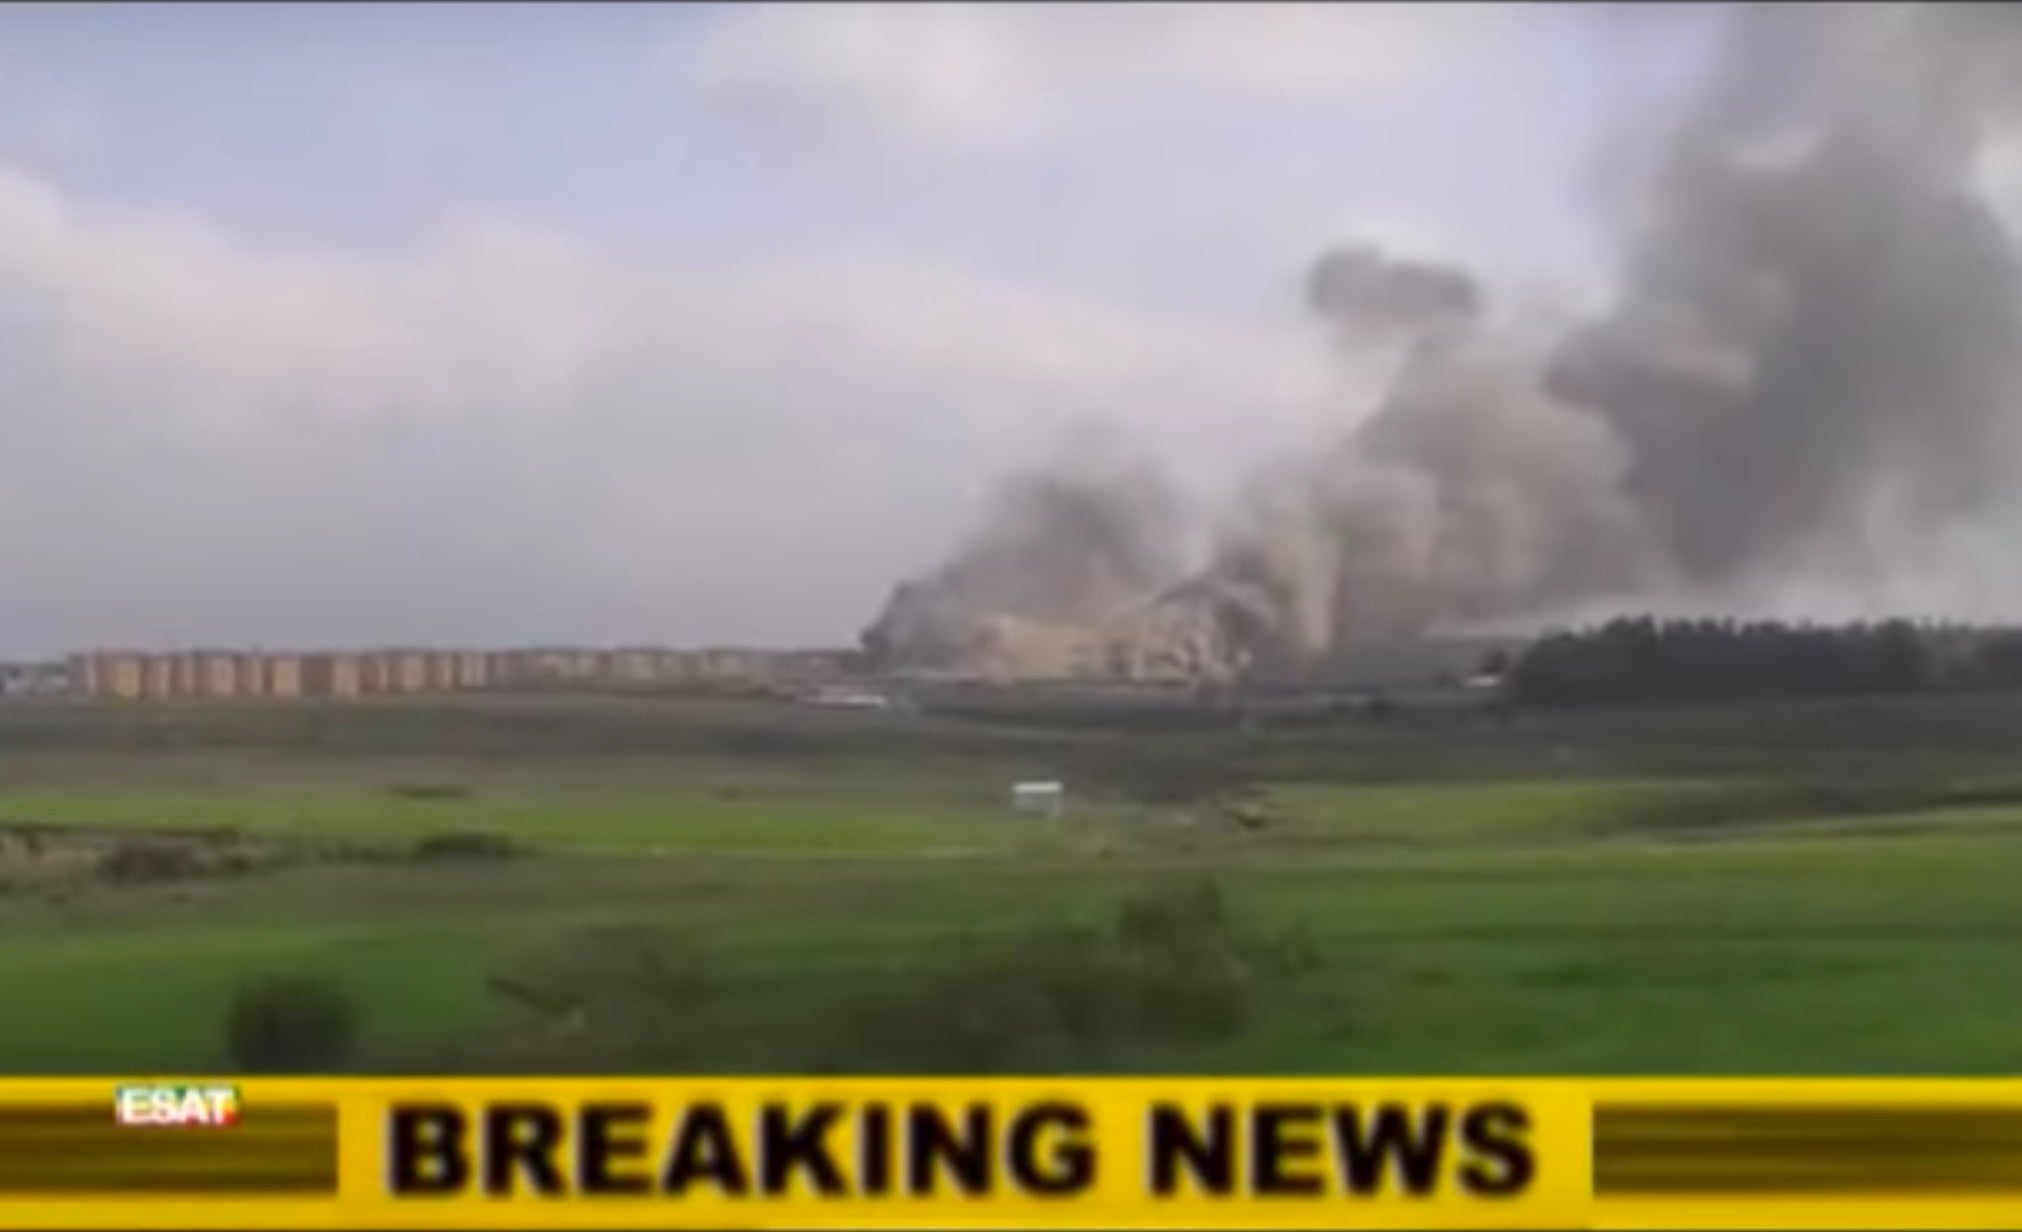 ESAT, a TV broadcaster based outside Ethiopia, showed grainy footage of the fire visible from a great distance